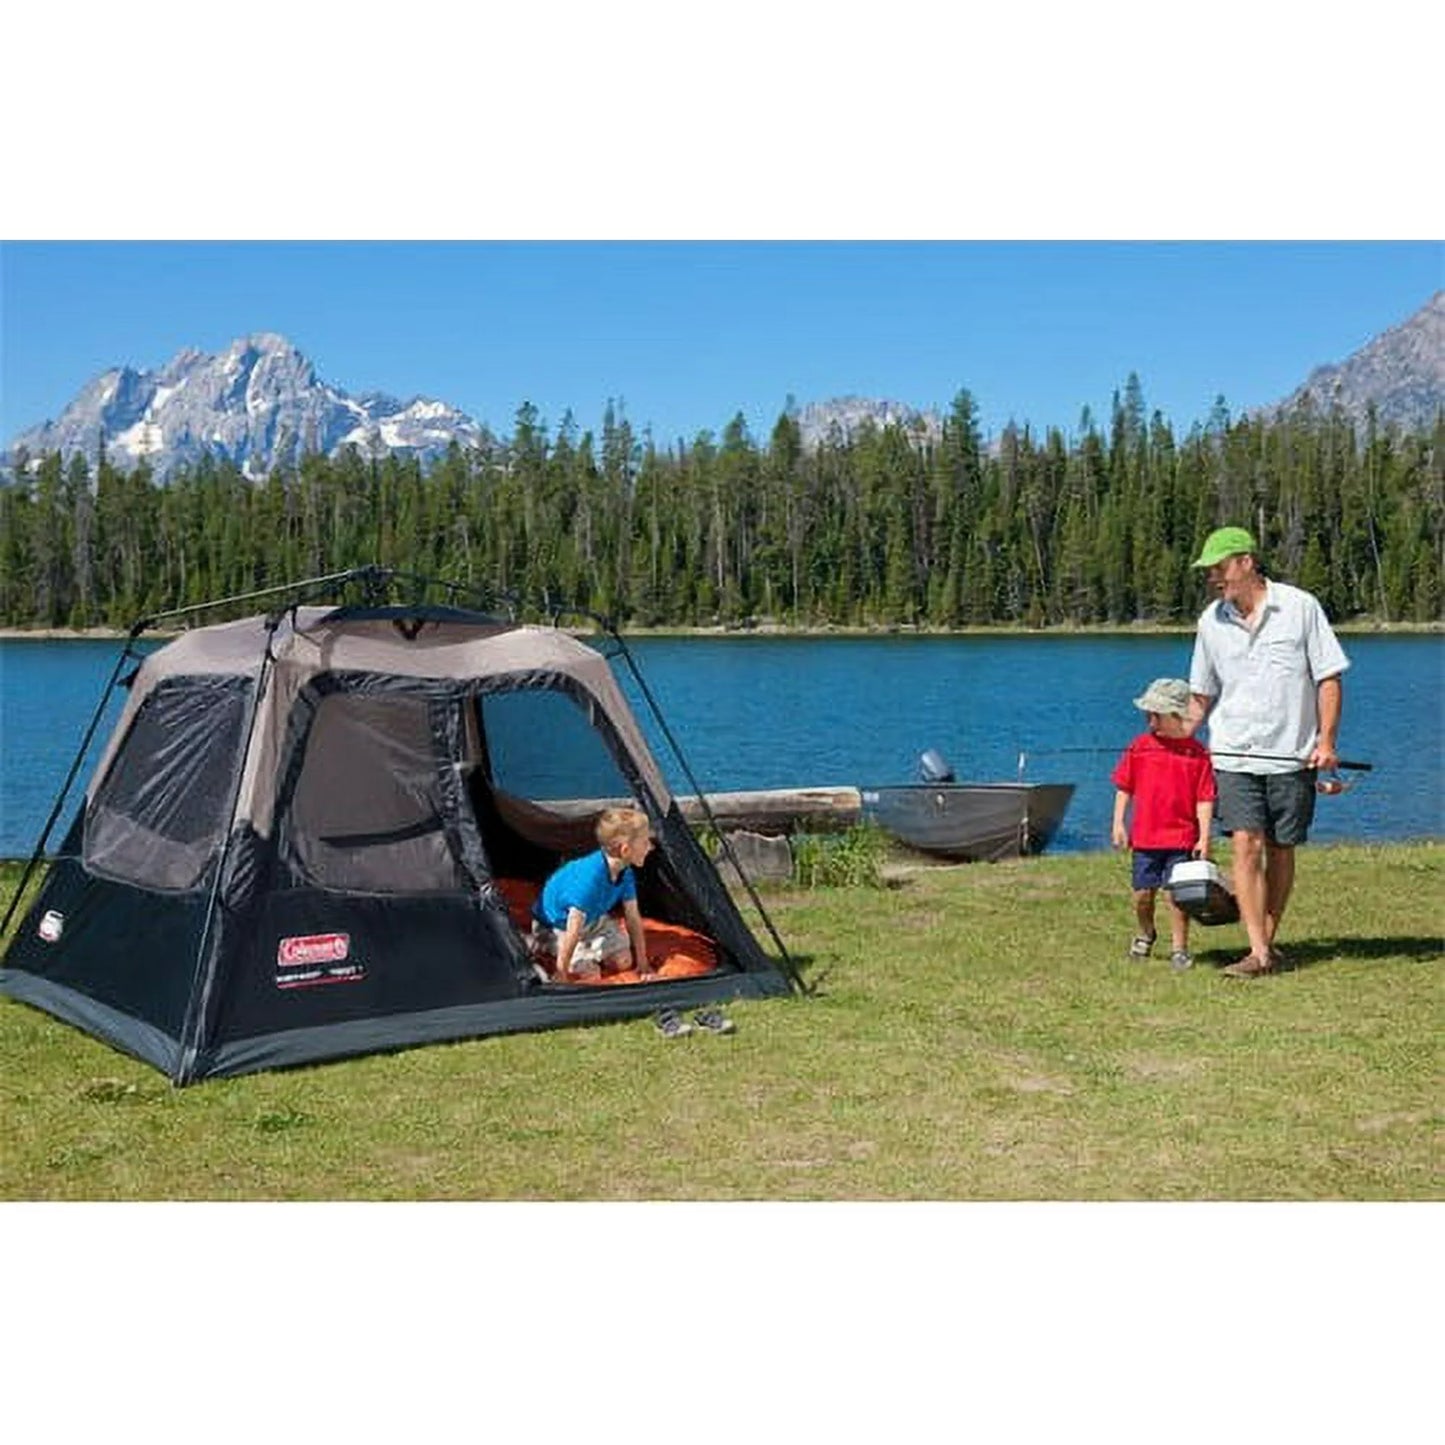 4-Person Cabin Camping Tent with Instant Setup